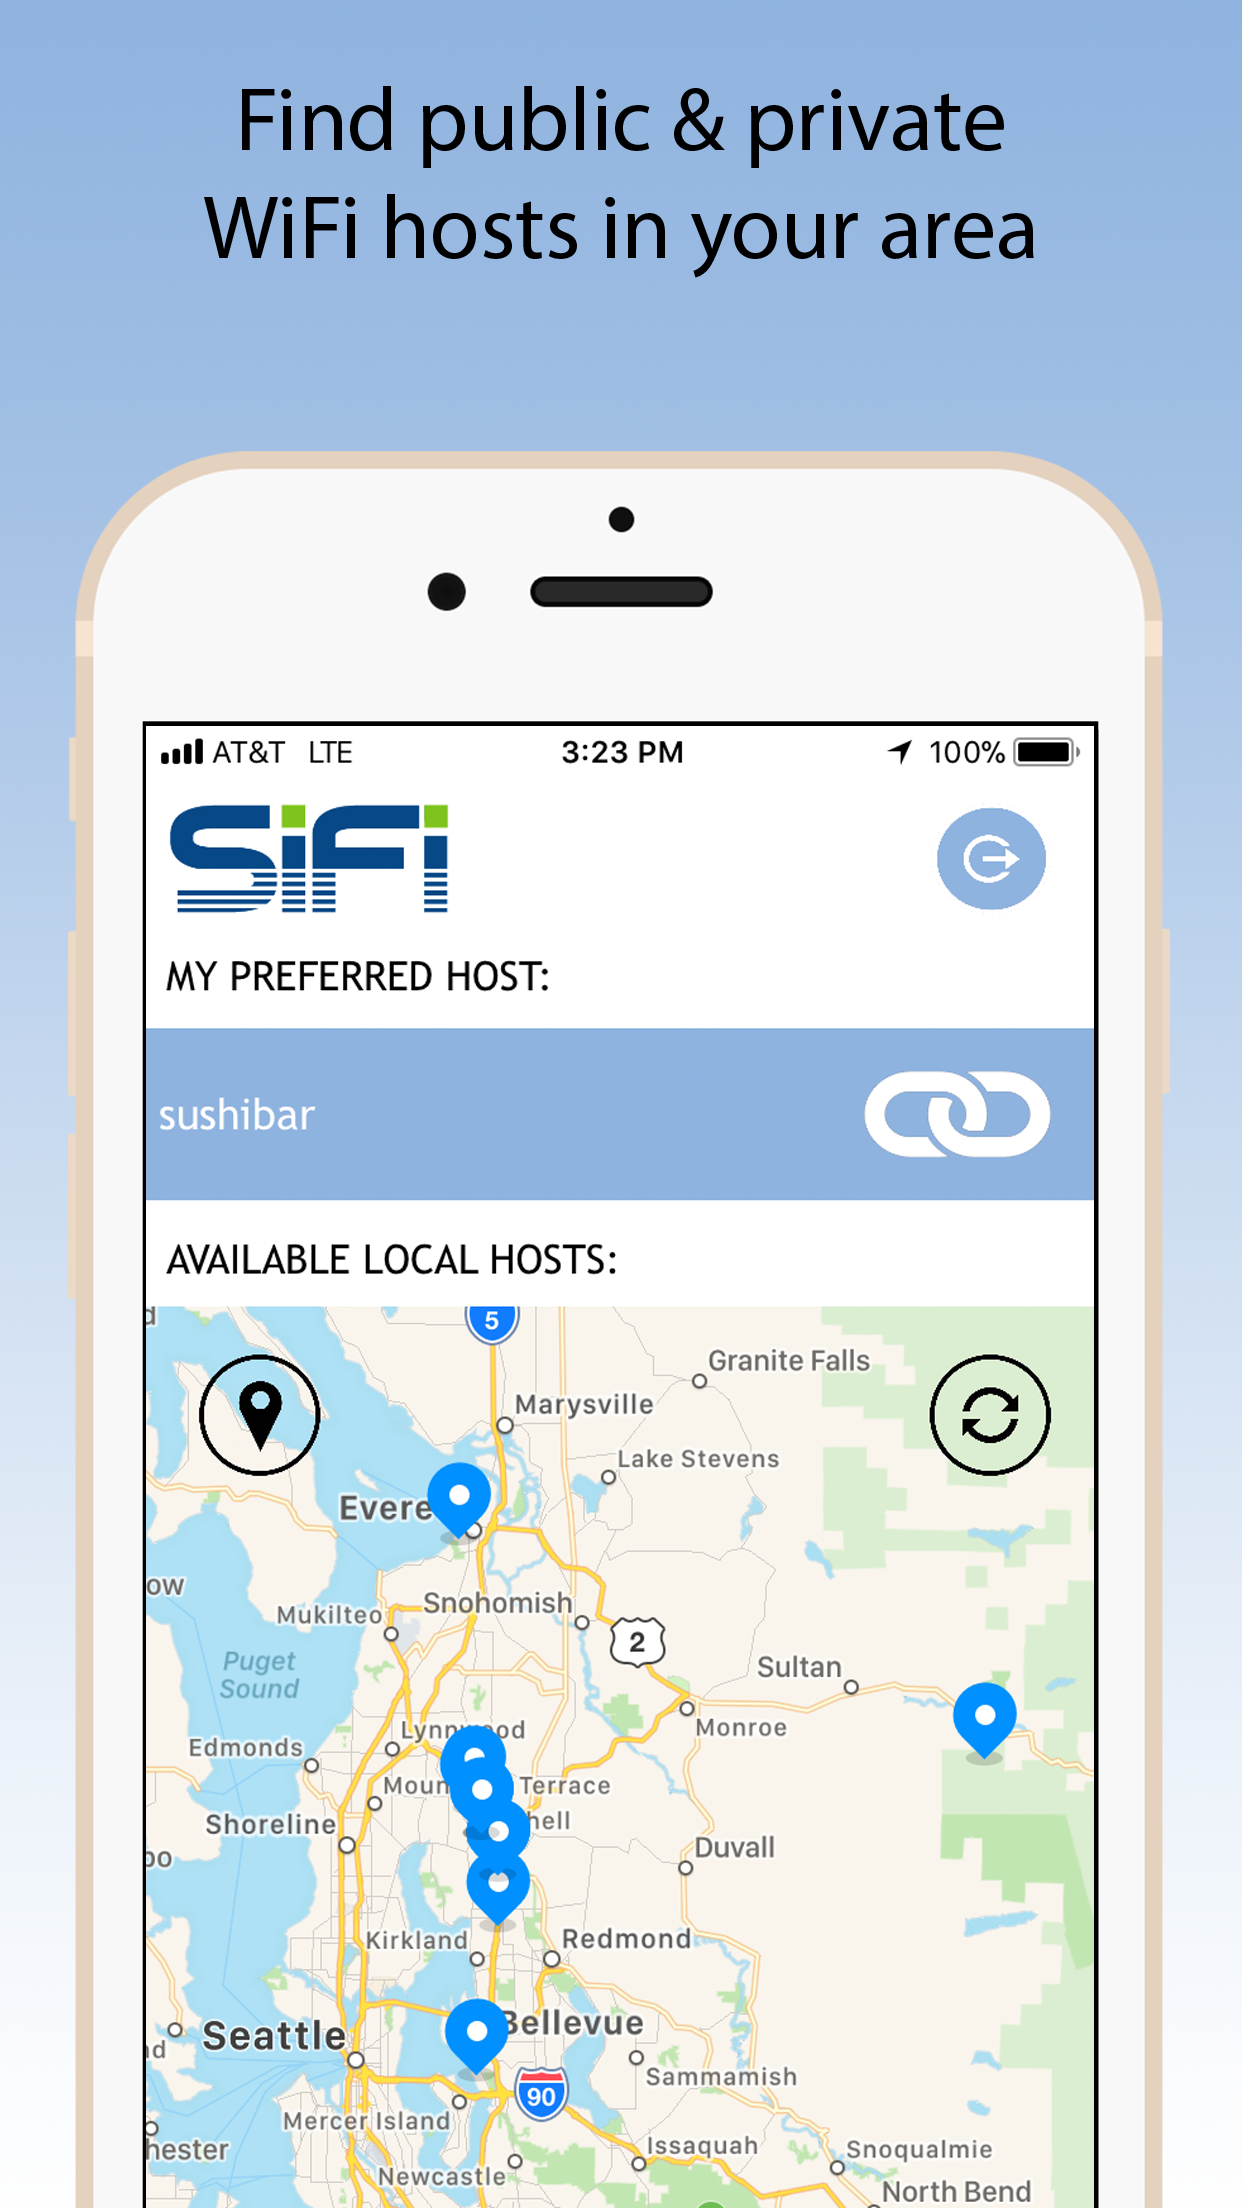 Find Wi-Fi connections using the app